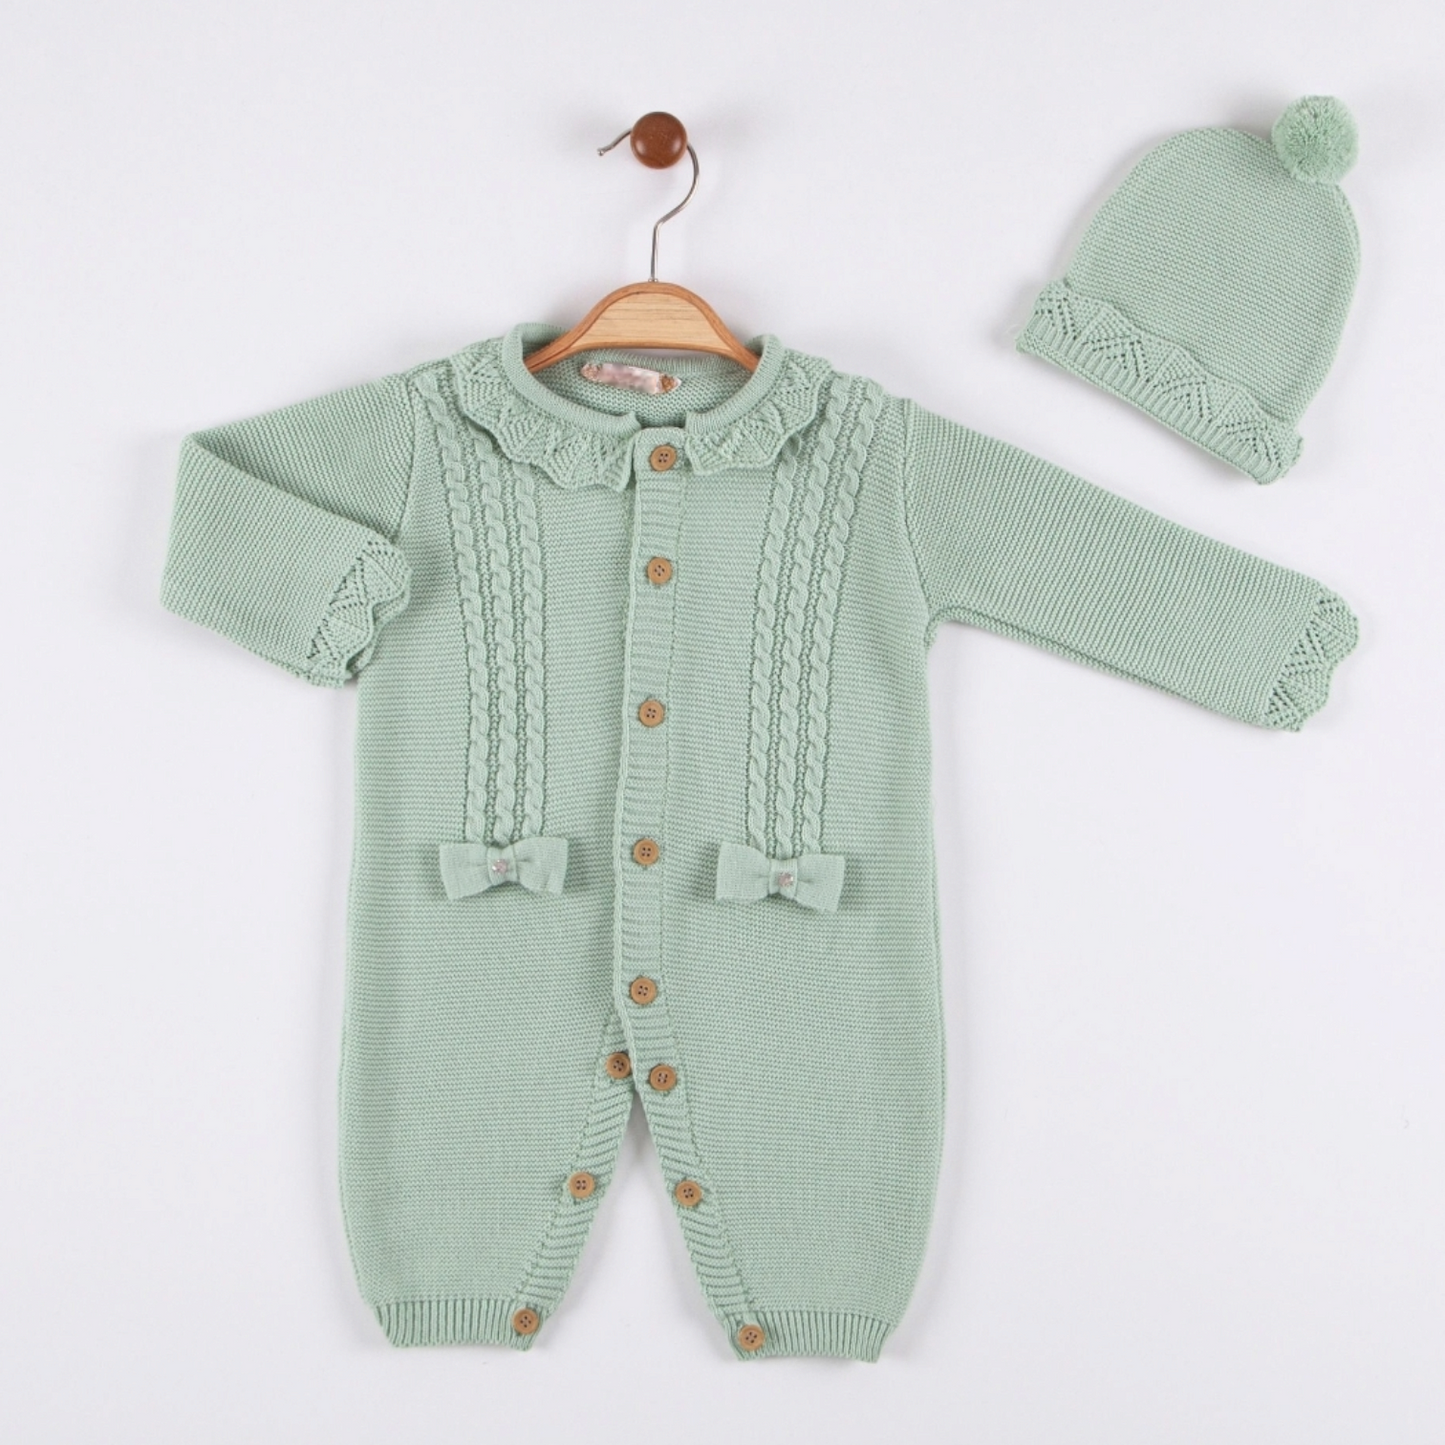 Girly onesie with hat